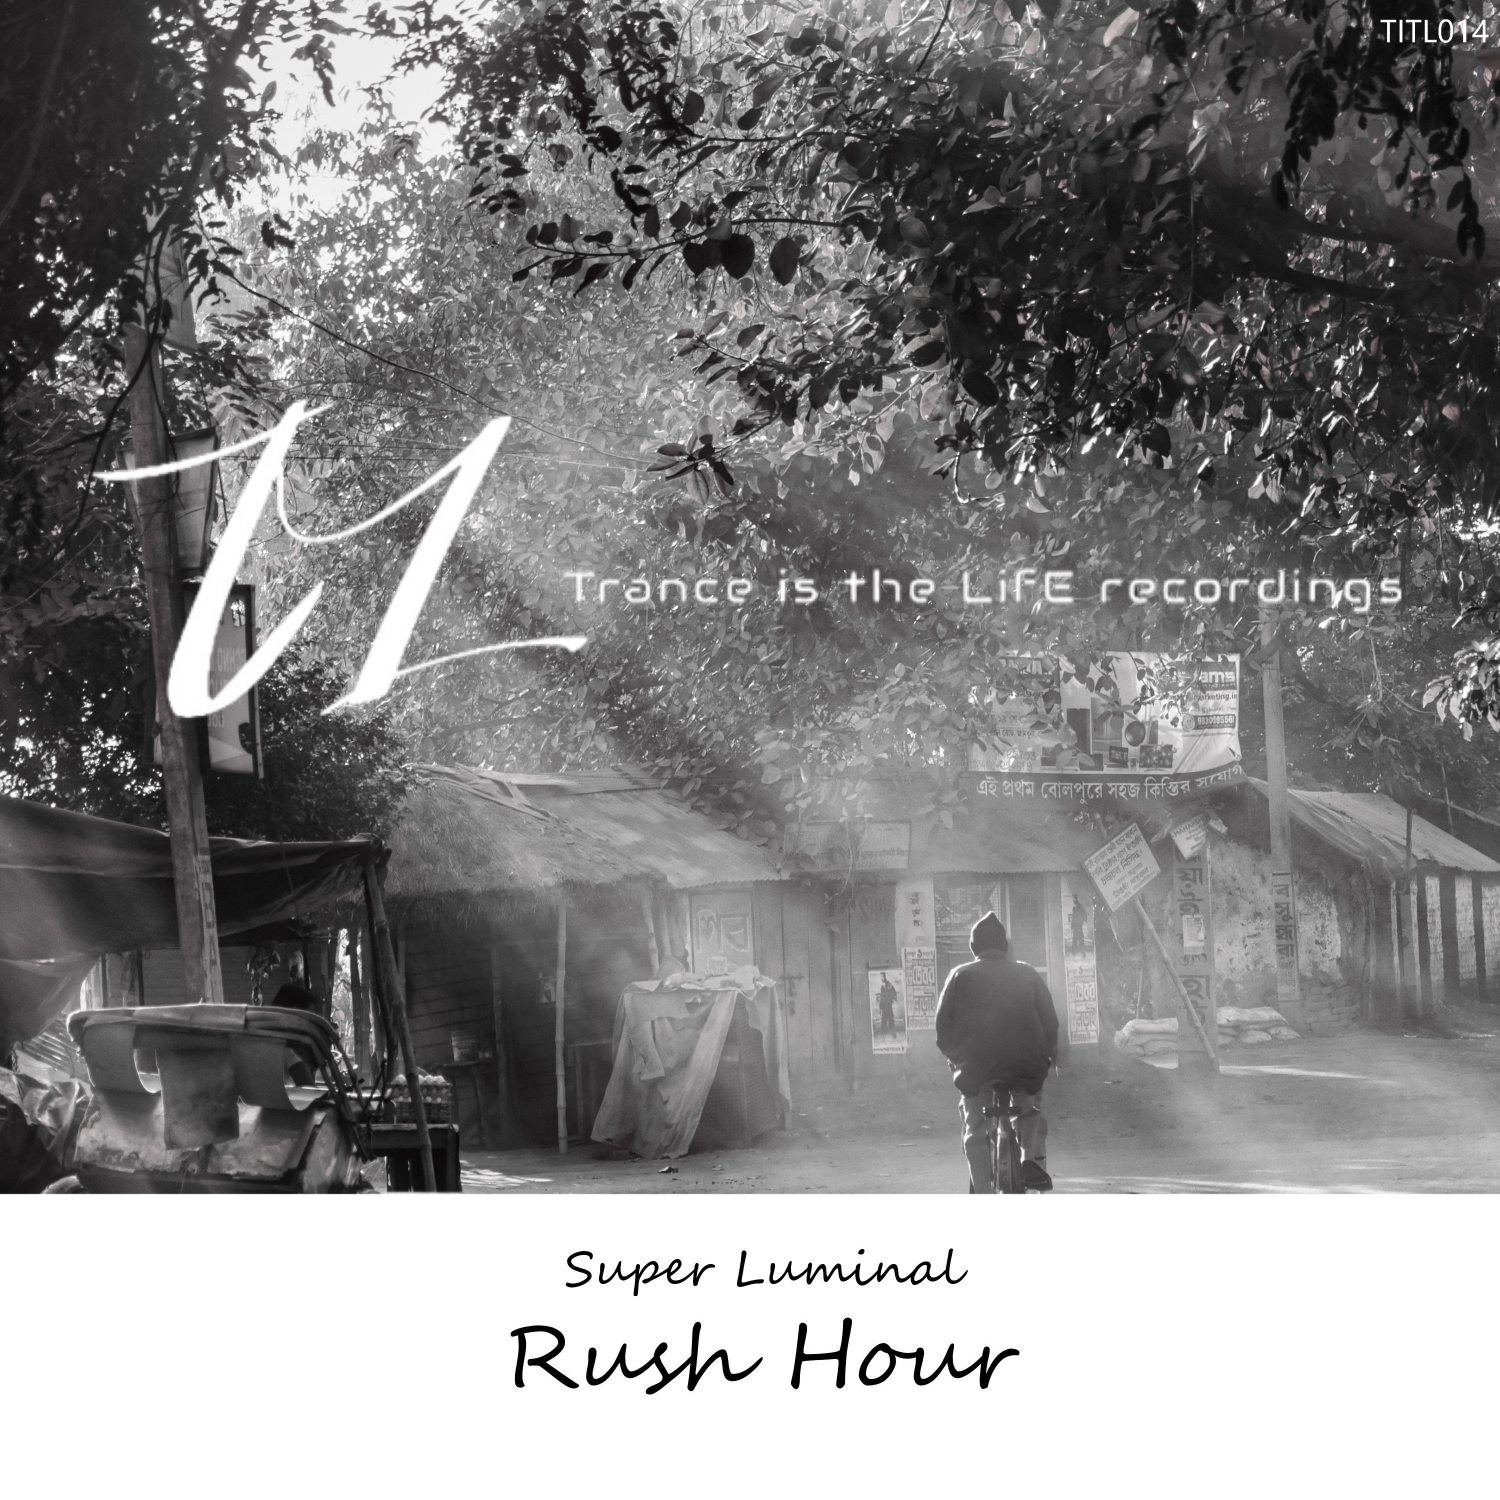 Super Luminal presents Rush Hour on Trance Is The Life Recordings